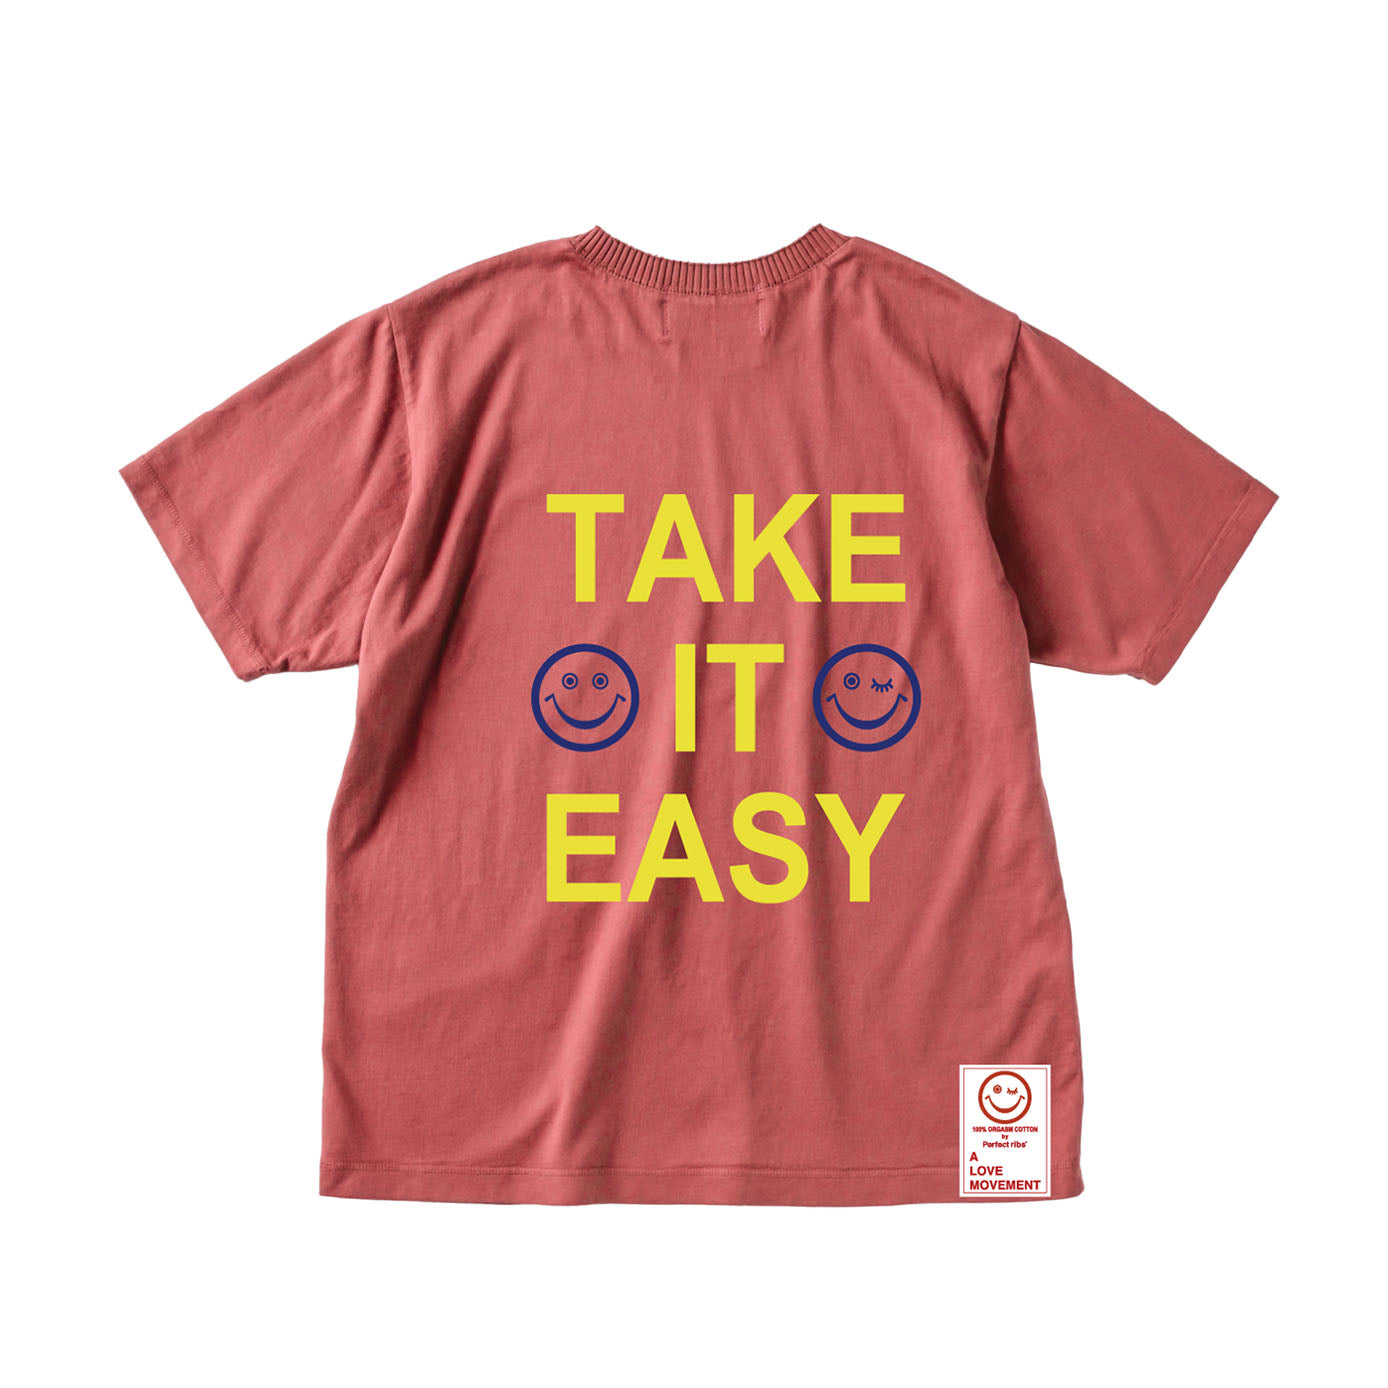 【Perfect ribs®︎×A LOVE MOVEMENT】"SMILE & TAKE IT EASY"Short Sleeve T Shirts / Vintage Red (ベーシック ショートスリーブ ティーシャツ/ヴィンテージレッド)